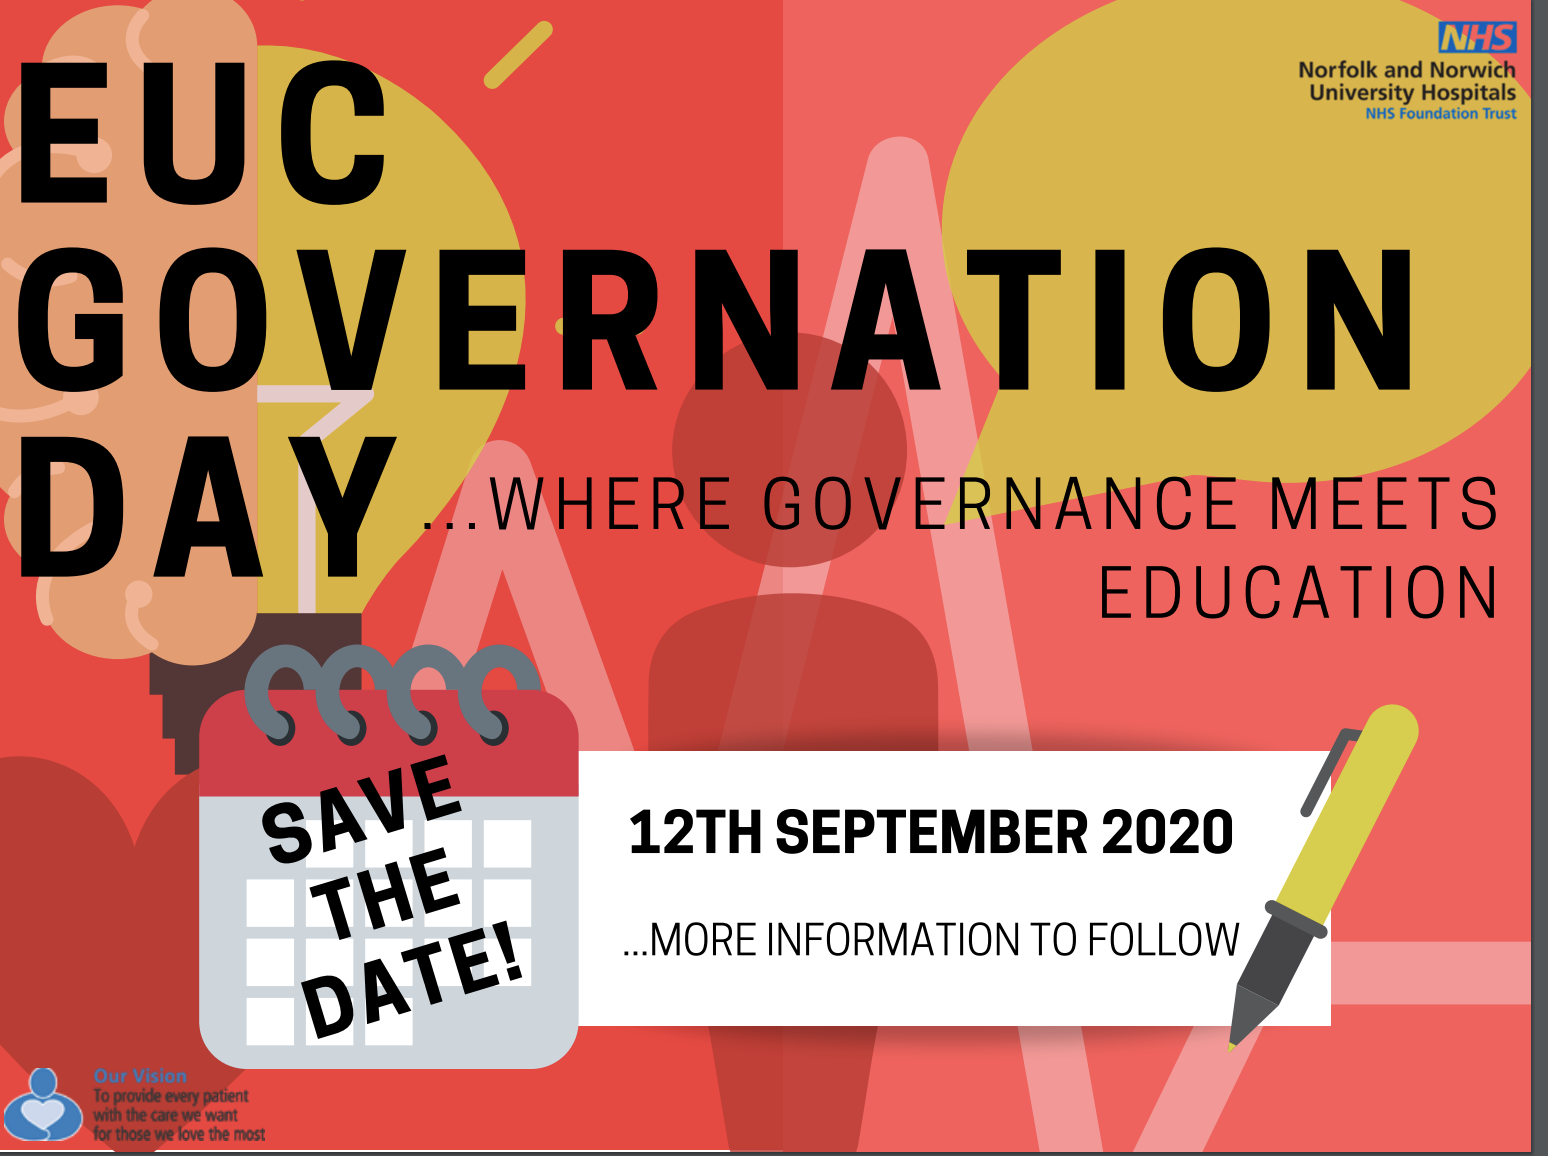 GOVERNATION- "Where Governance meets Education" featured image